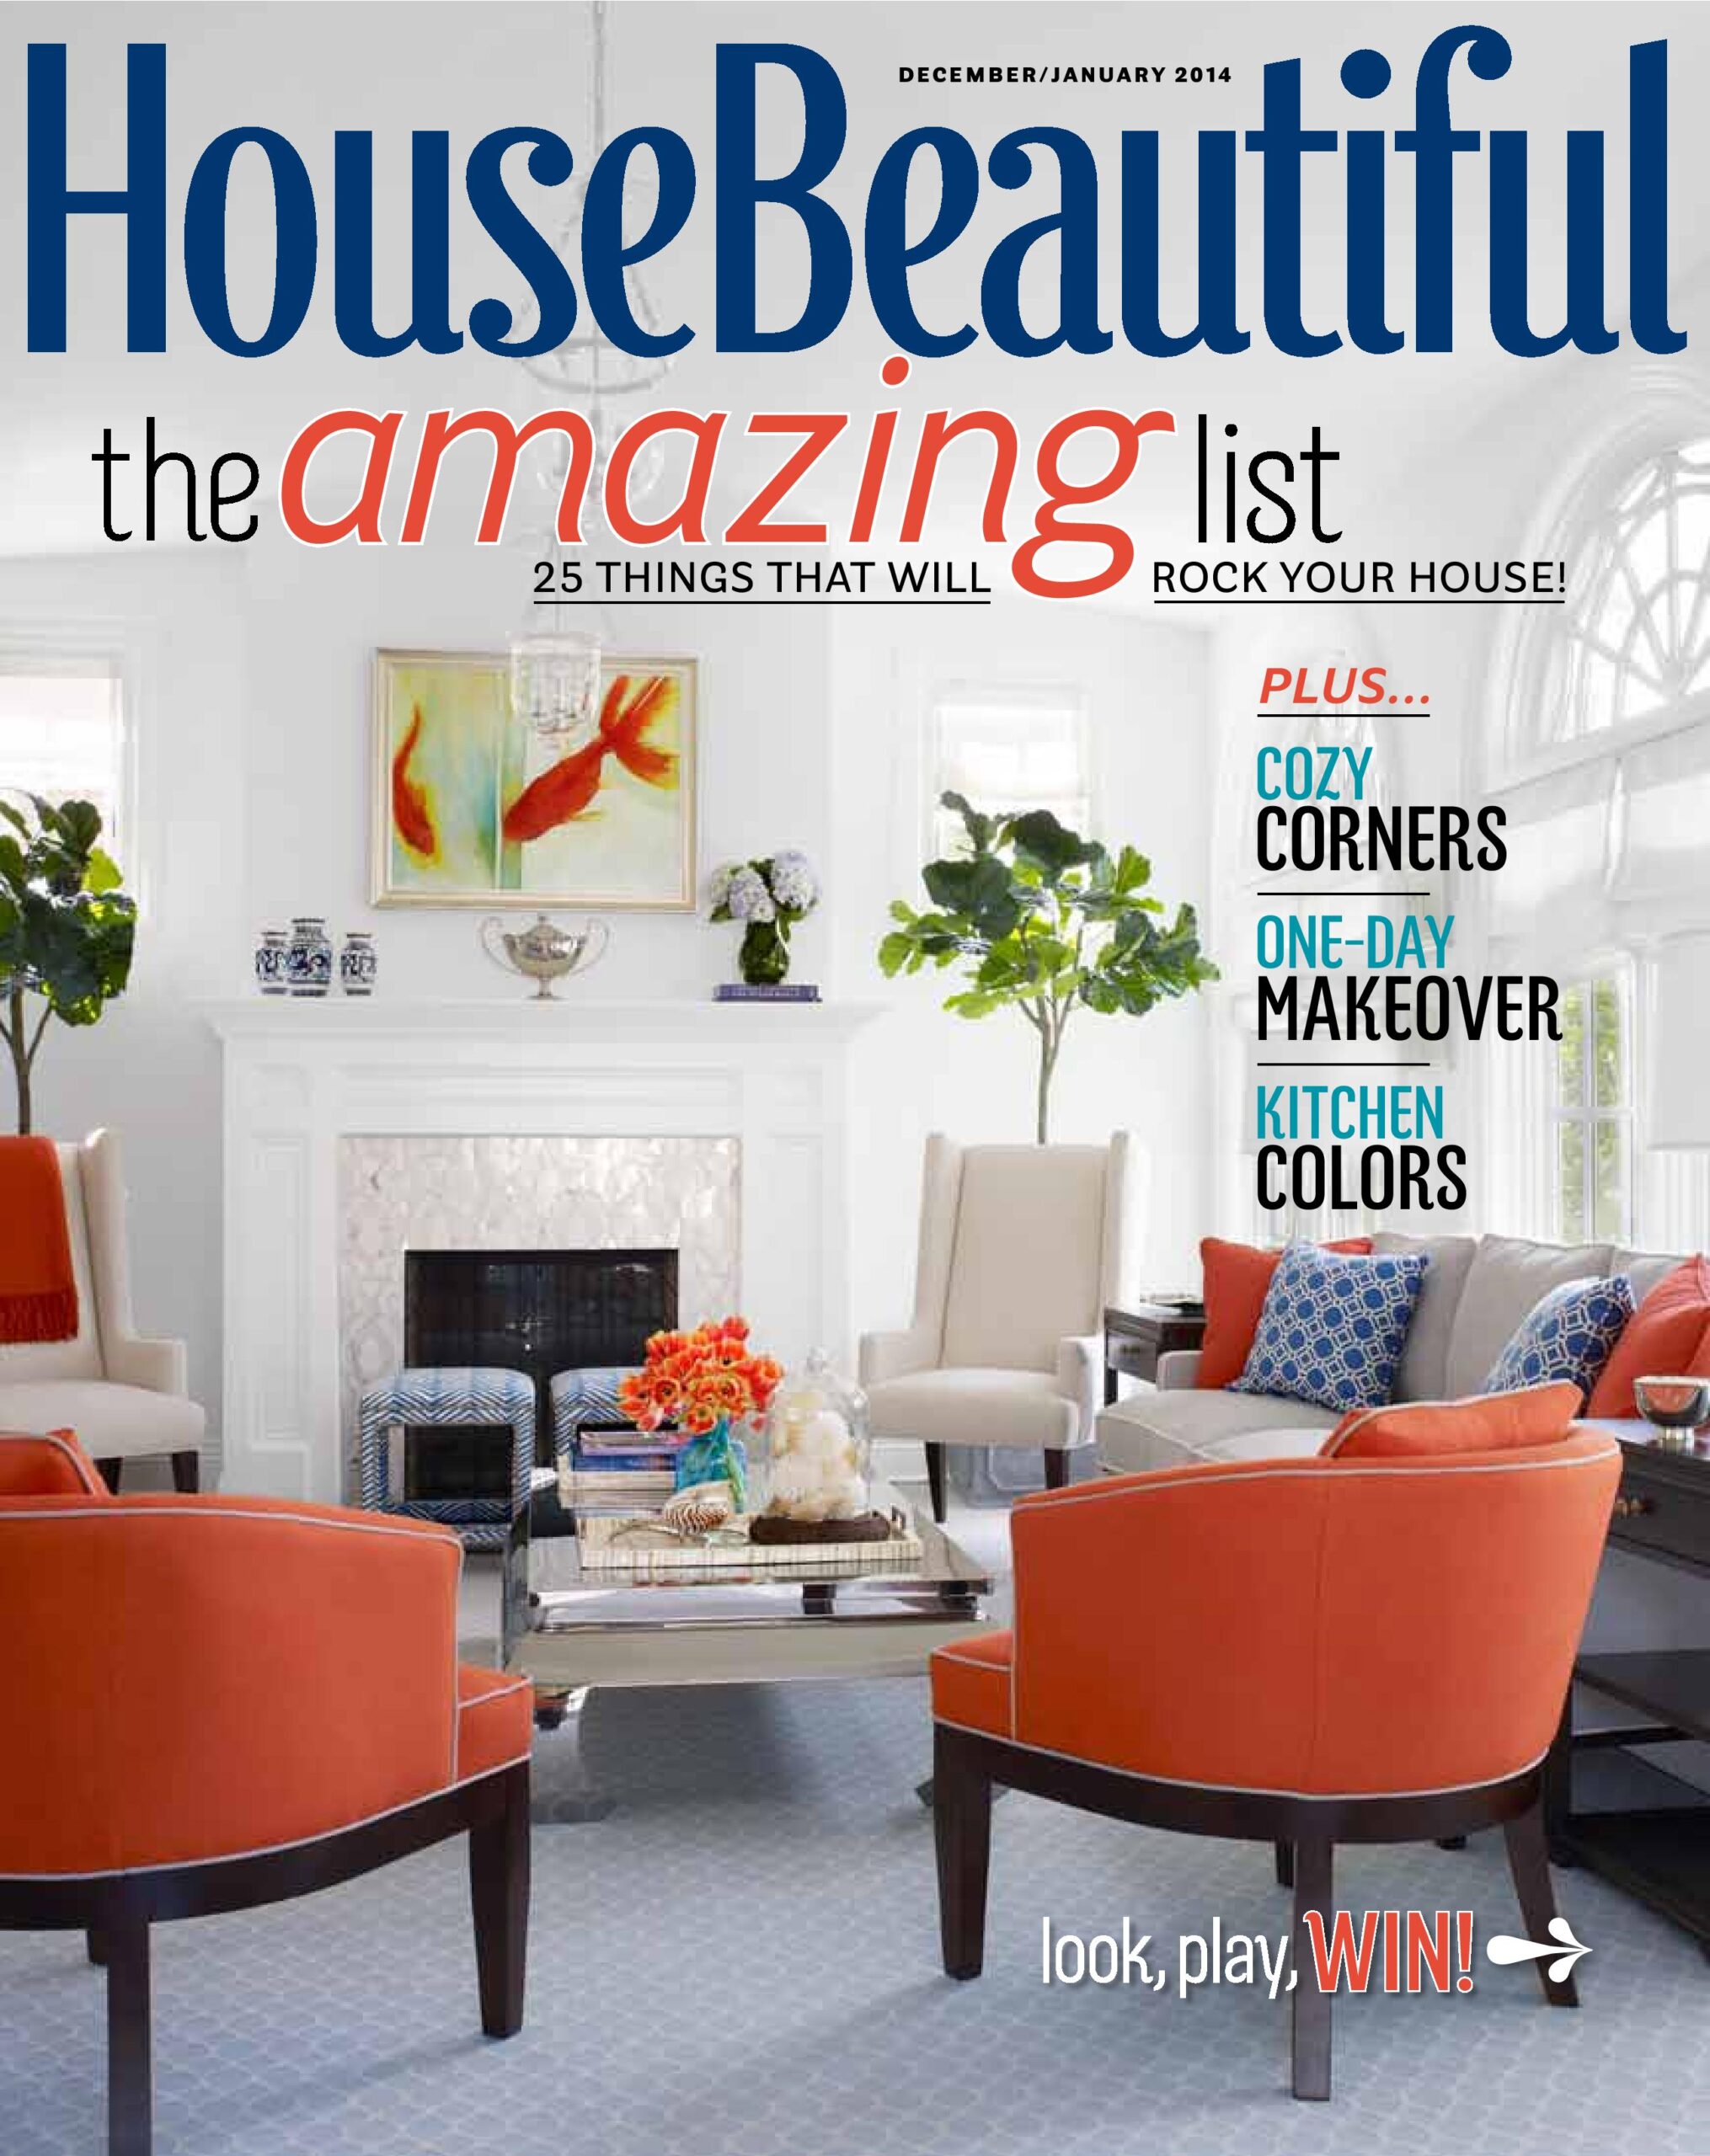 House Beautiful Cover Image for magazine feat Libby Langdon